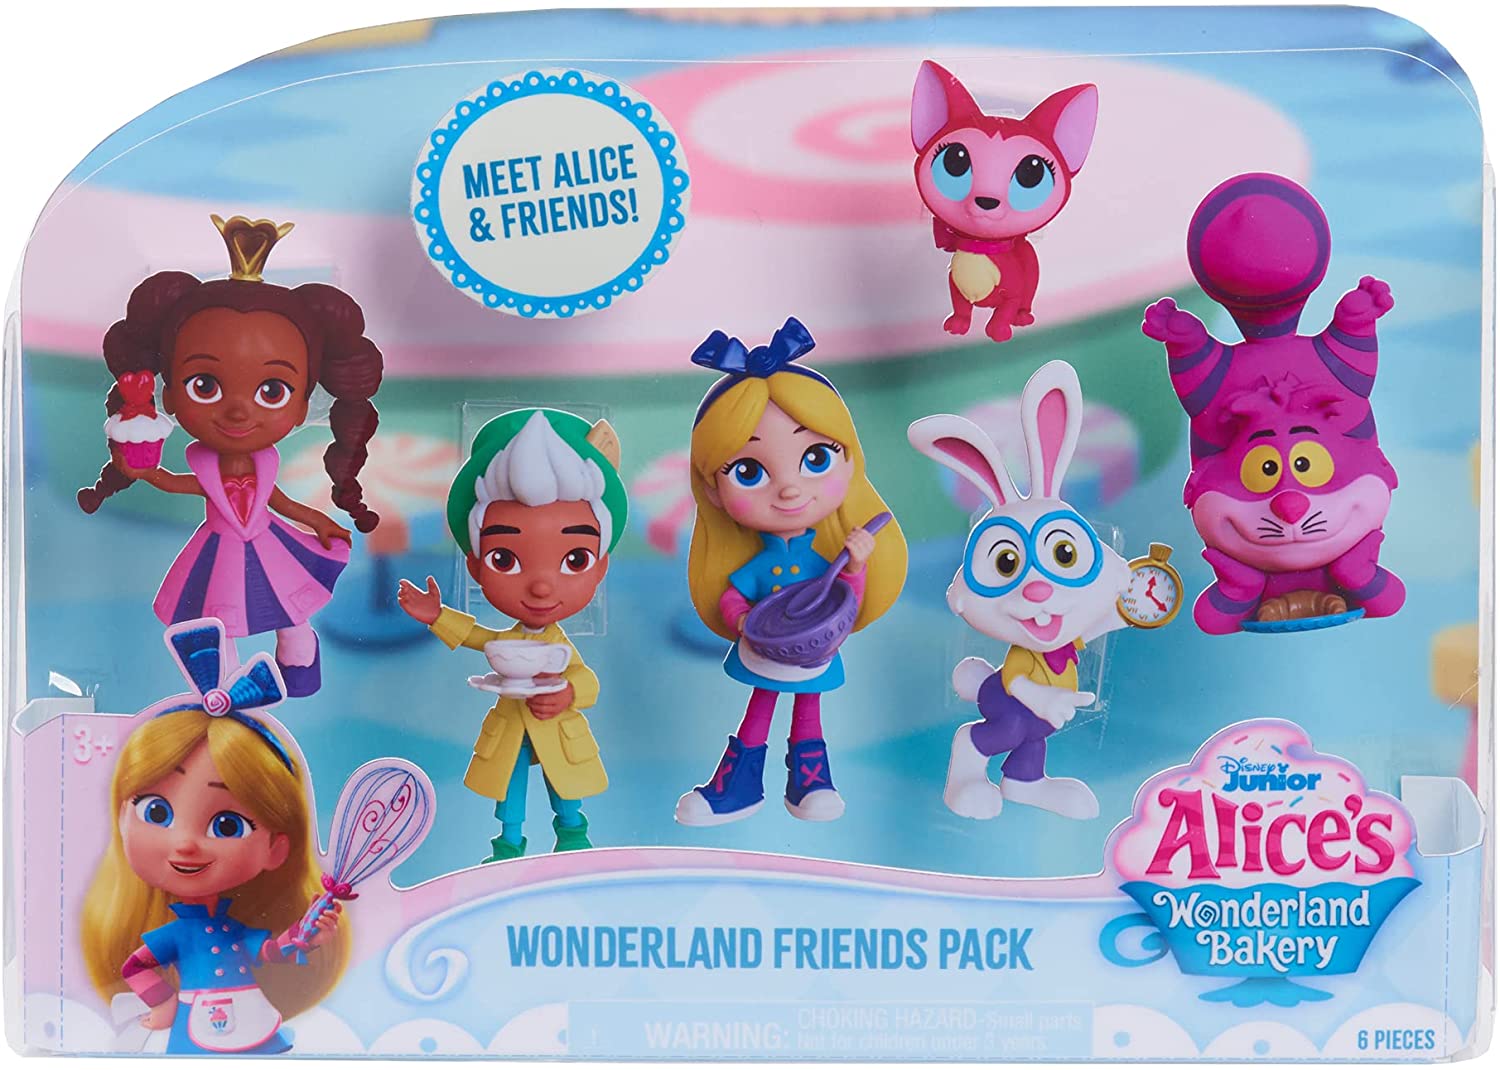 Disney Junior Alice's Wonderland Bakery Playset and Toy Figures, 15 Pieces,  Officially Licensed Kids Toys for Ages 3 Up,  Exclusive